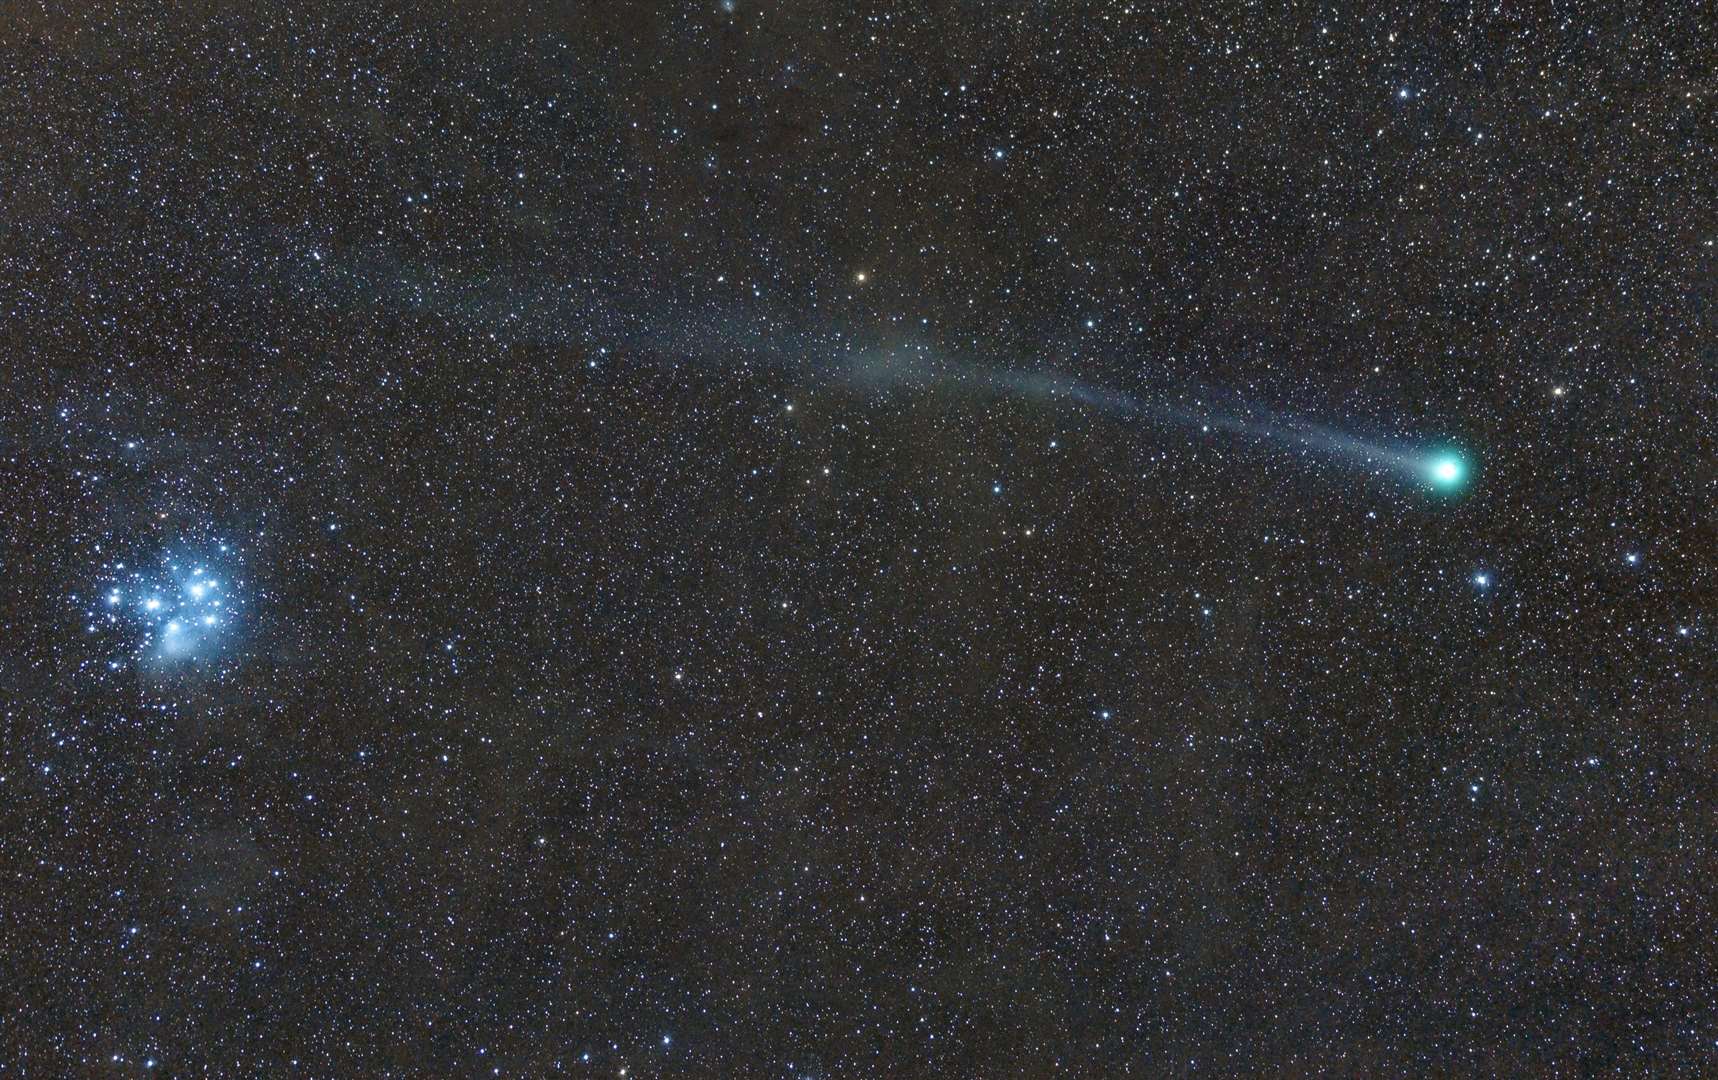 A comet is made up of icy gas and debris. Image: Adobe stock image.